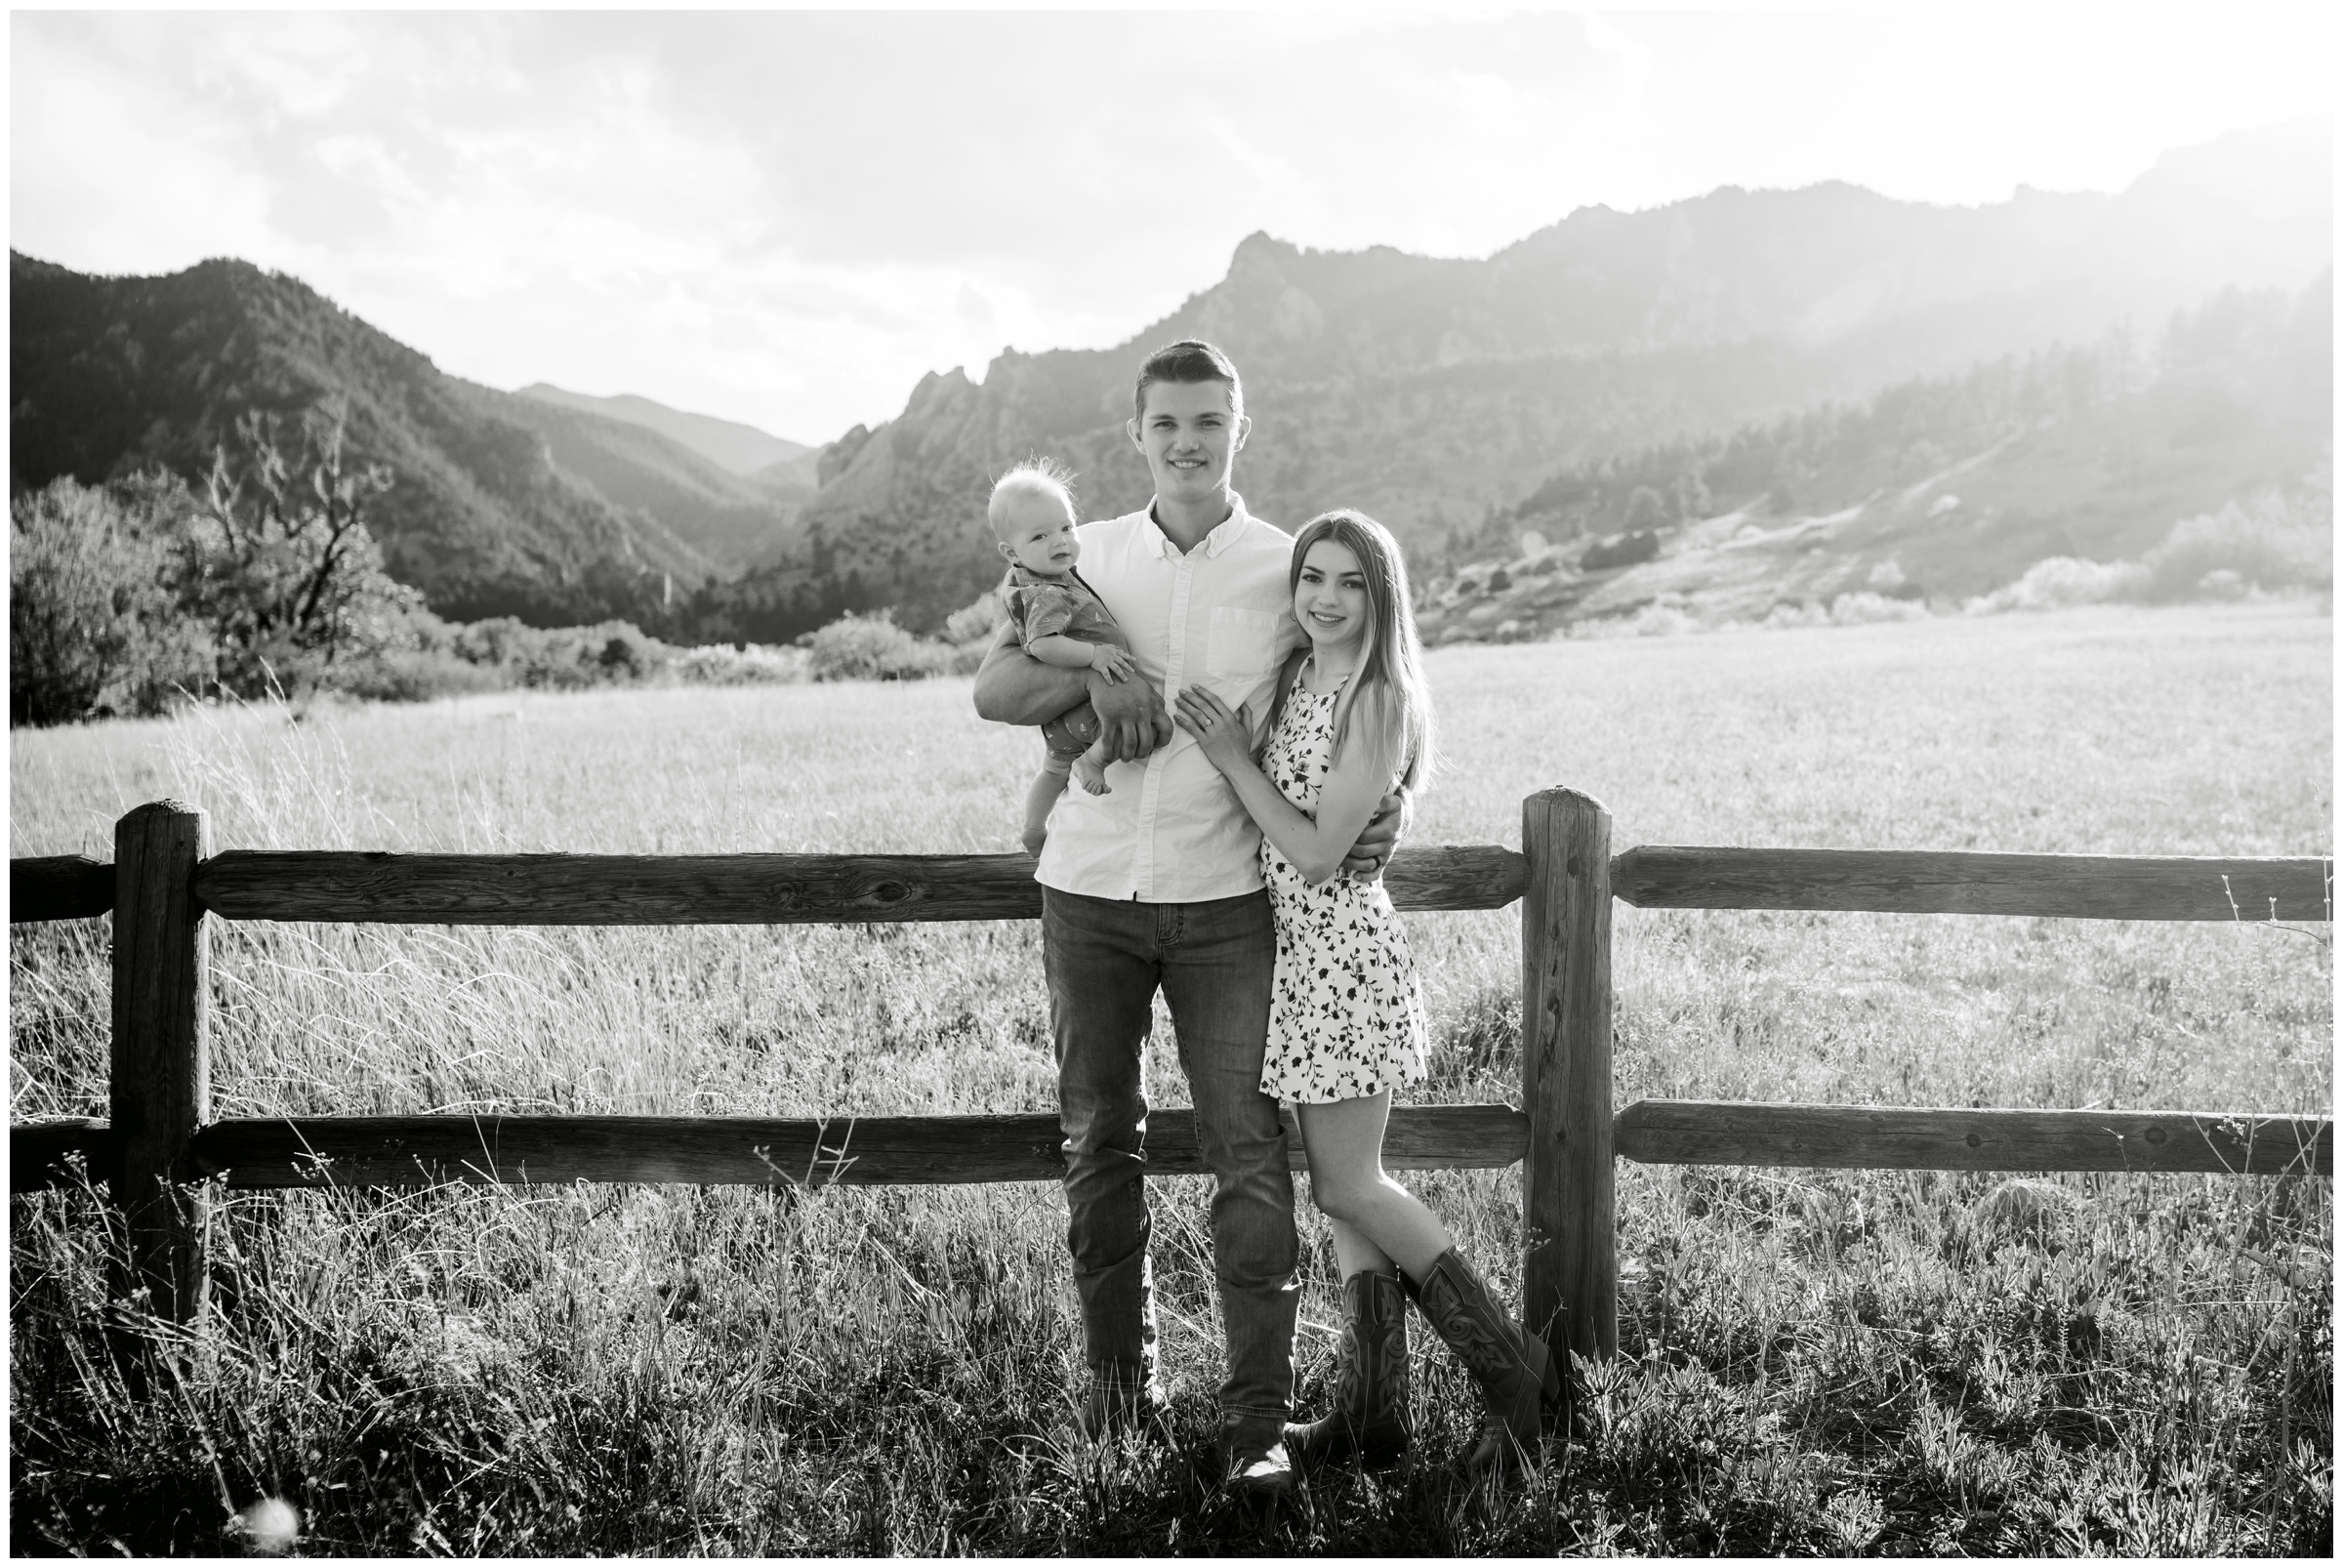 Boulder family pictures at South Mesa Trail during spring by Colorado portrait photographer Plum Pretty Photography